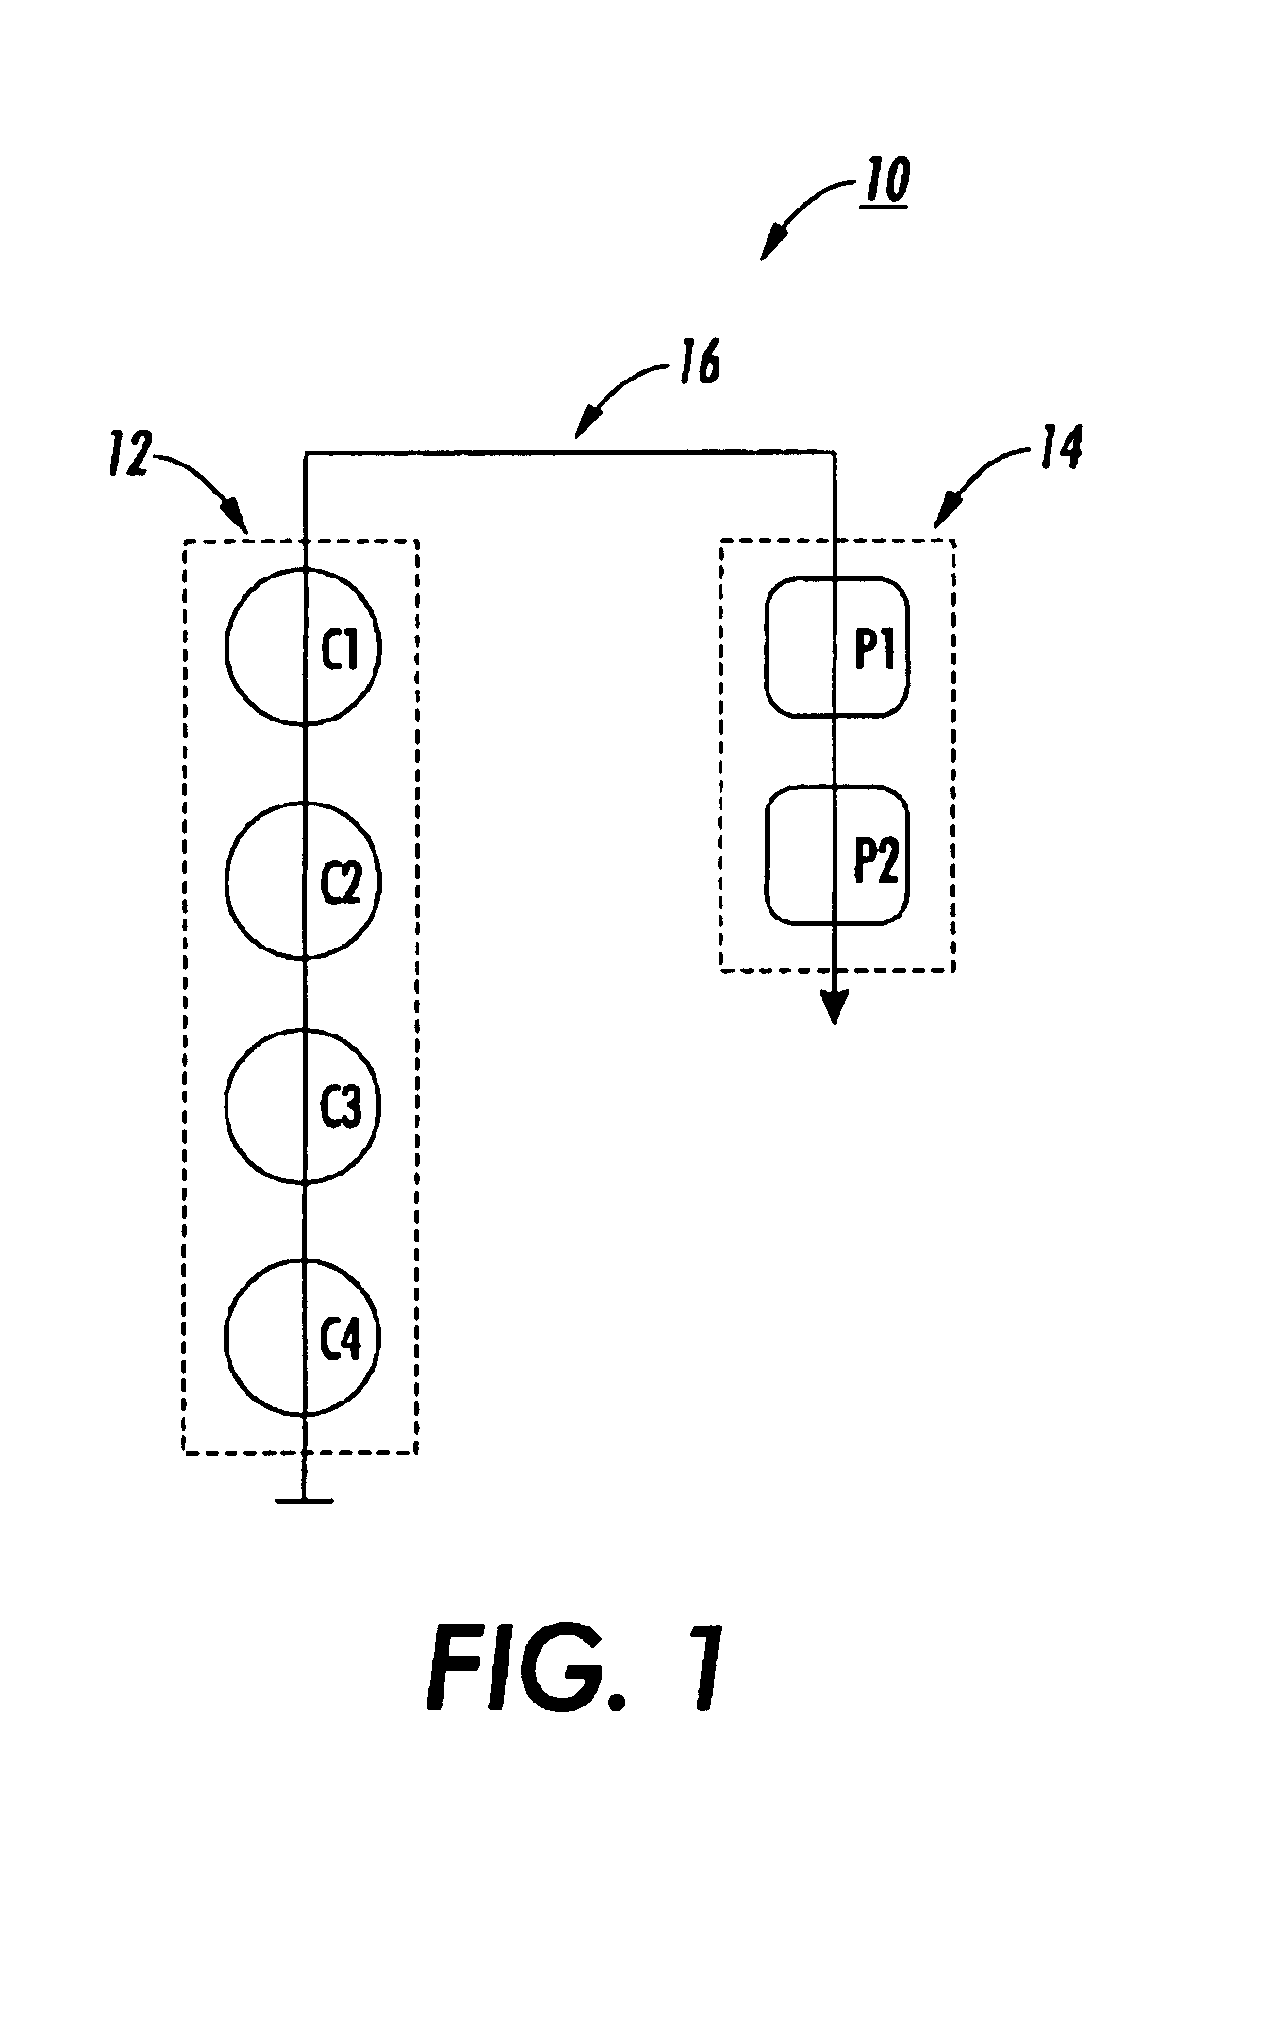 Distributed control of non-linear coupled systems with a single output